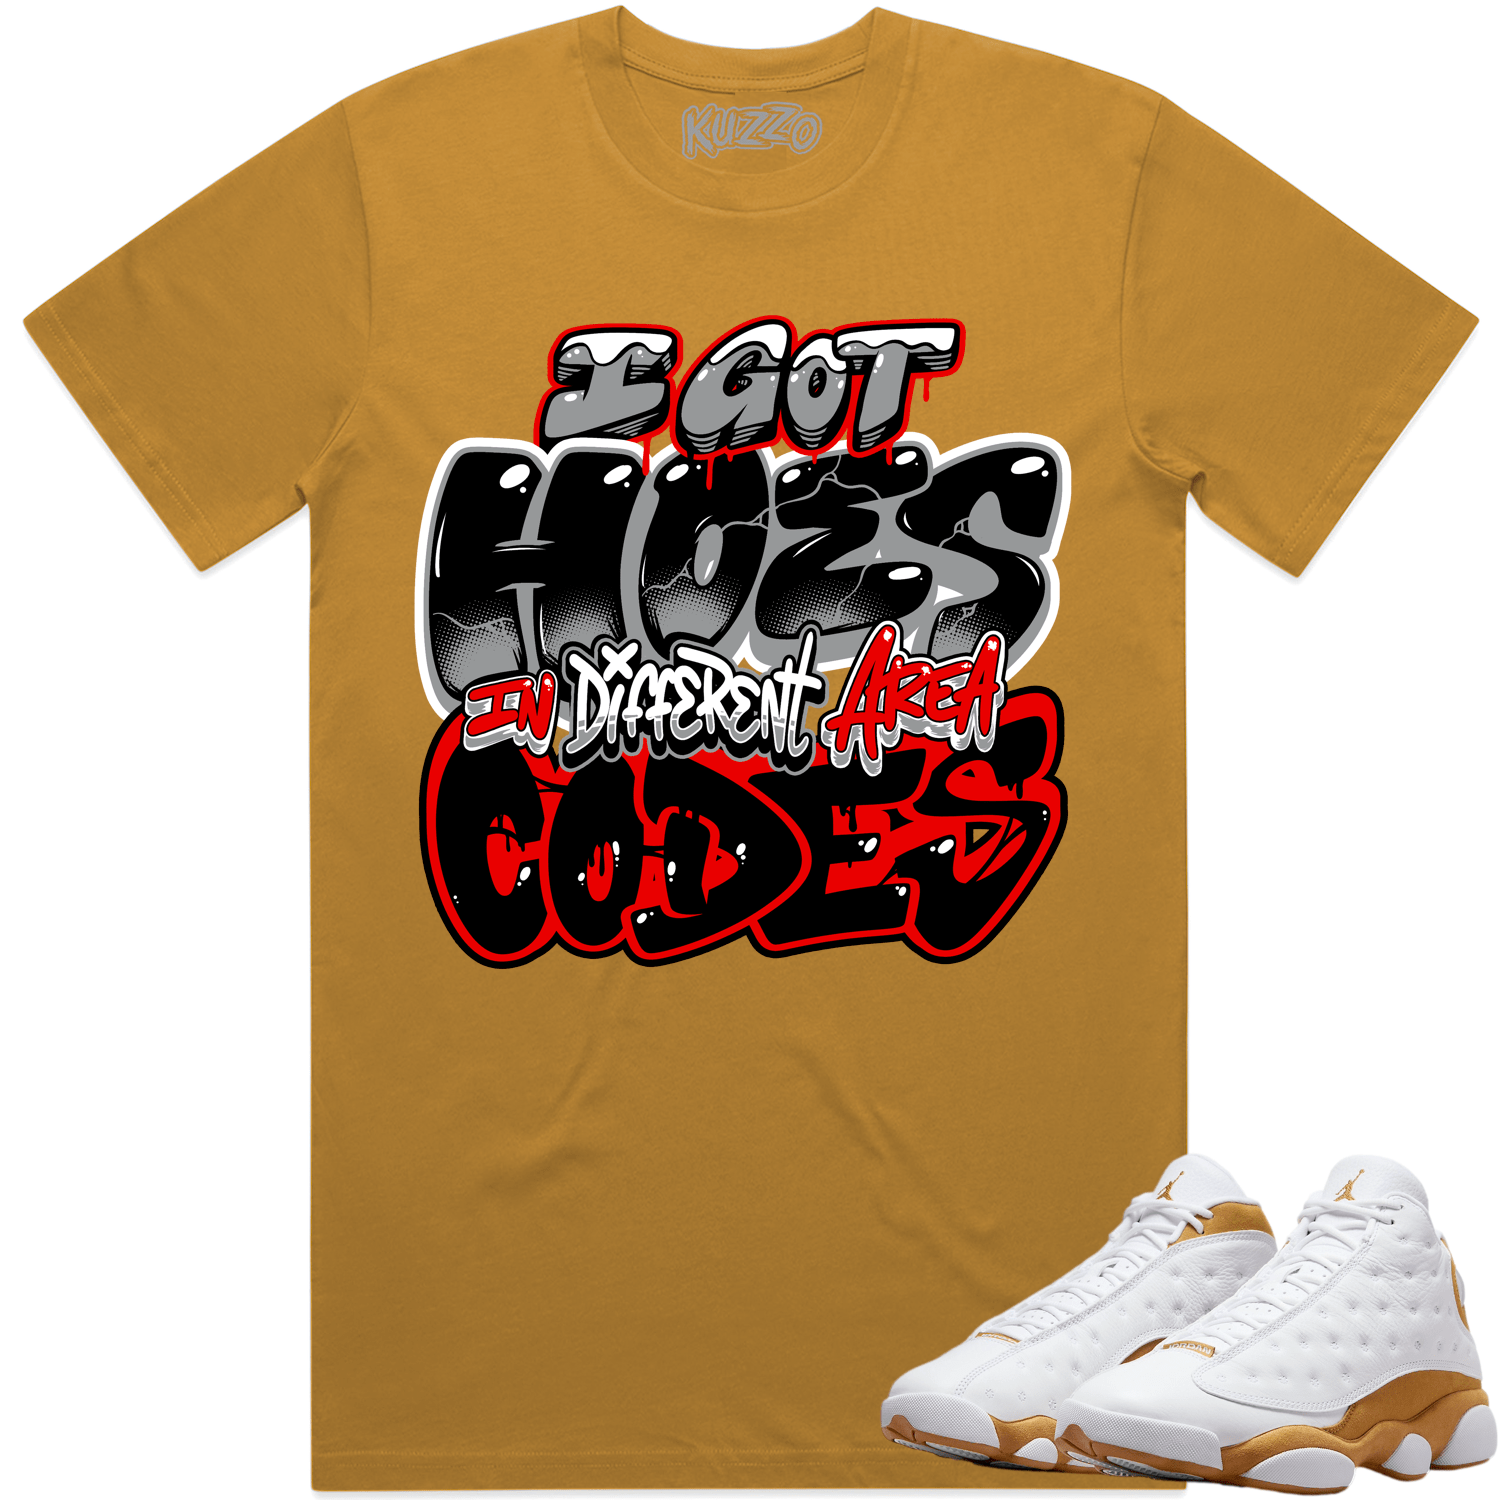 Curry Dunks Shirt - Dunks Low Curry Sneaker Tees - Area Codes